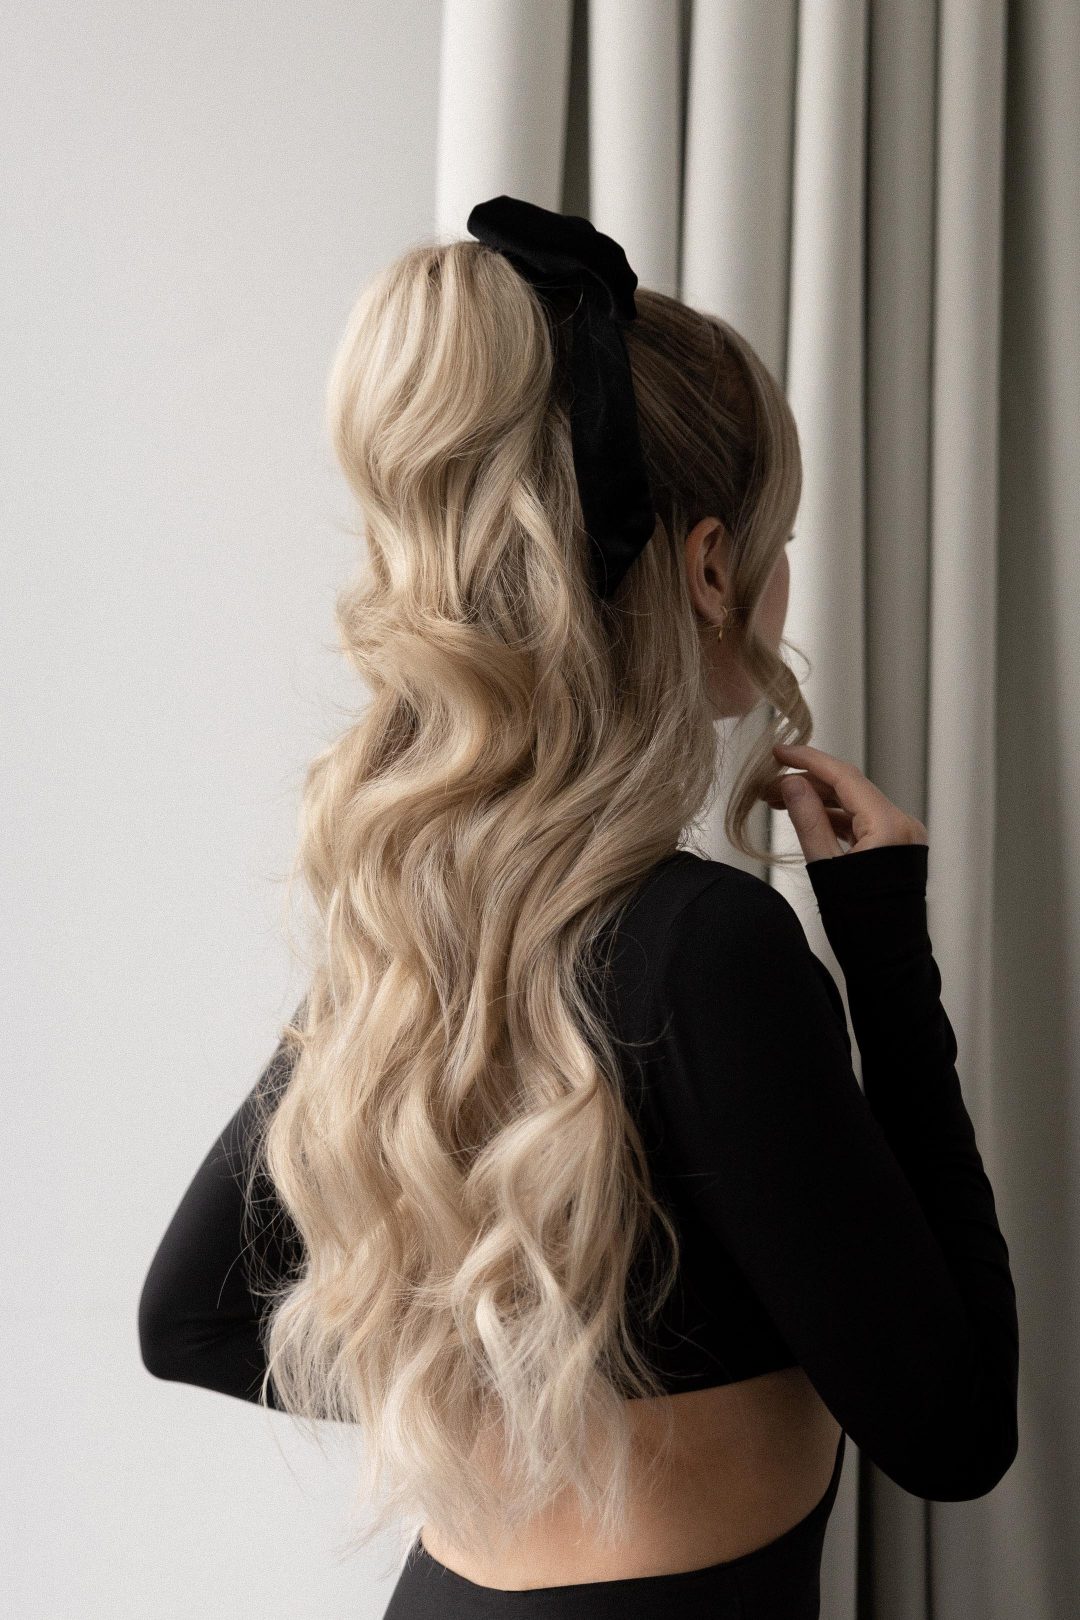 3 EASY NEW YEARS EVE HAIRSTYLES + Tutorials 2021 | Half up Half Down Hairstyle with Bow - Perfect for medium - long hair lengths